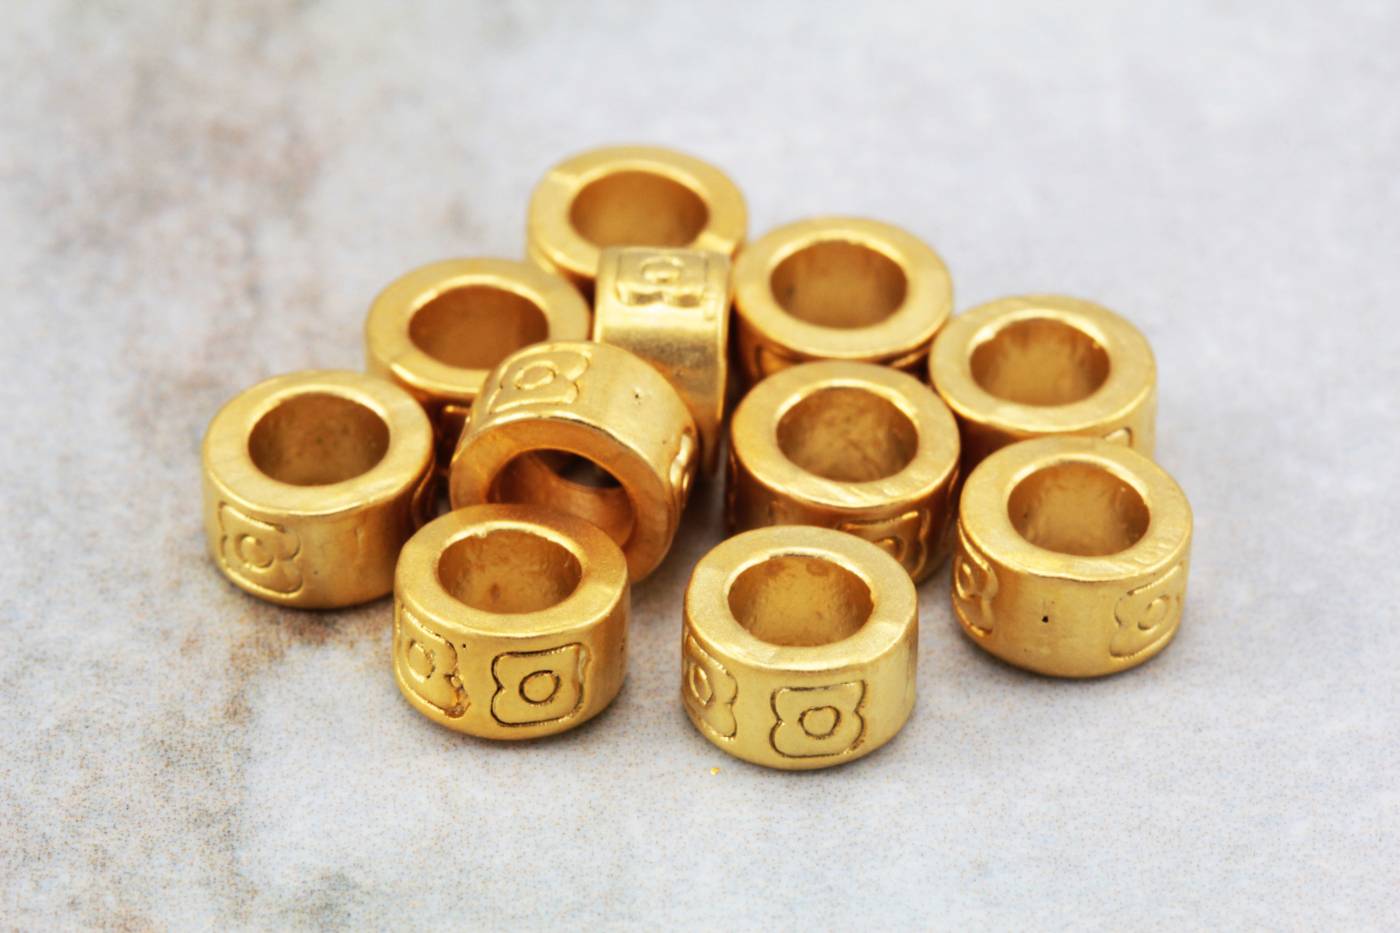 7mm-gold-plated-rondelle-spacer-beads